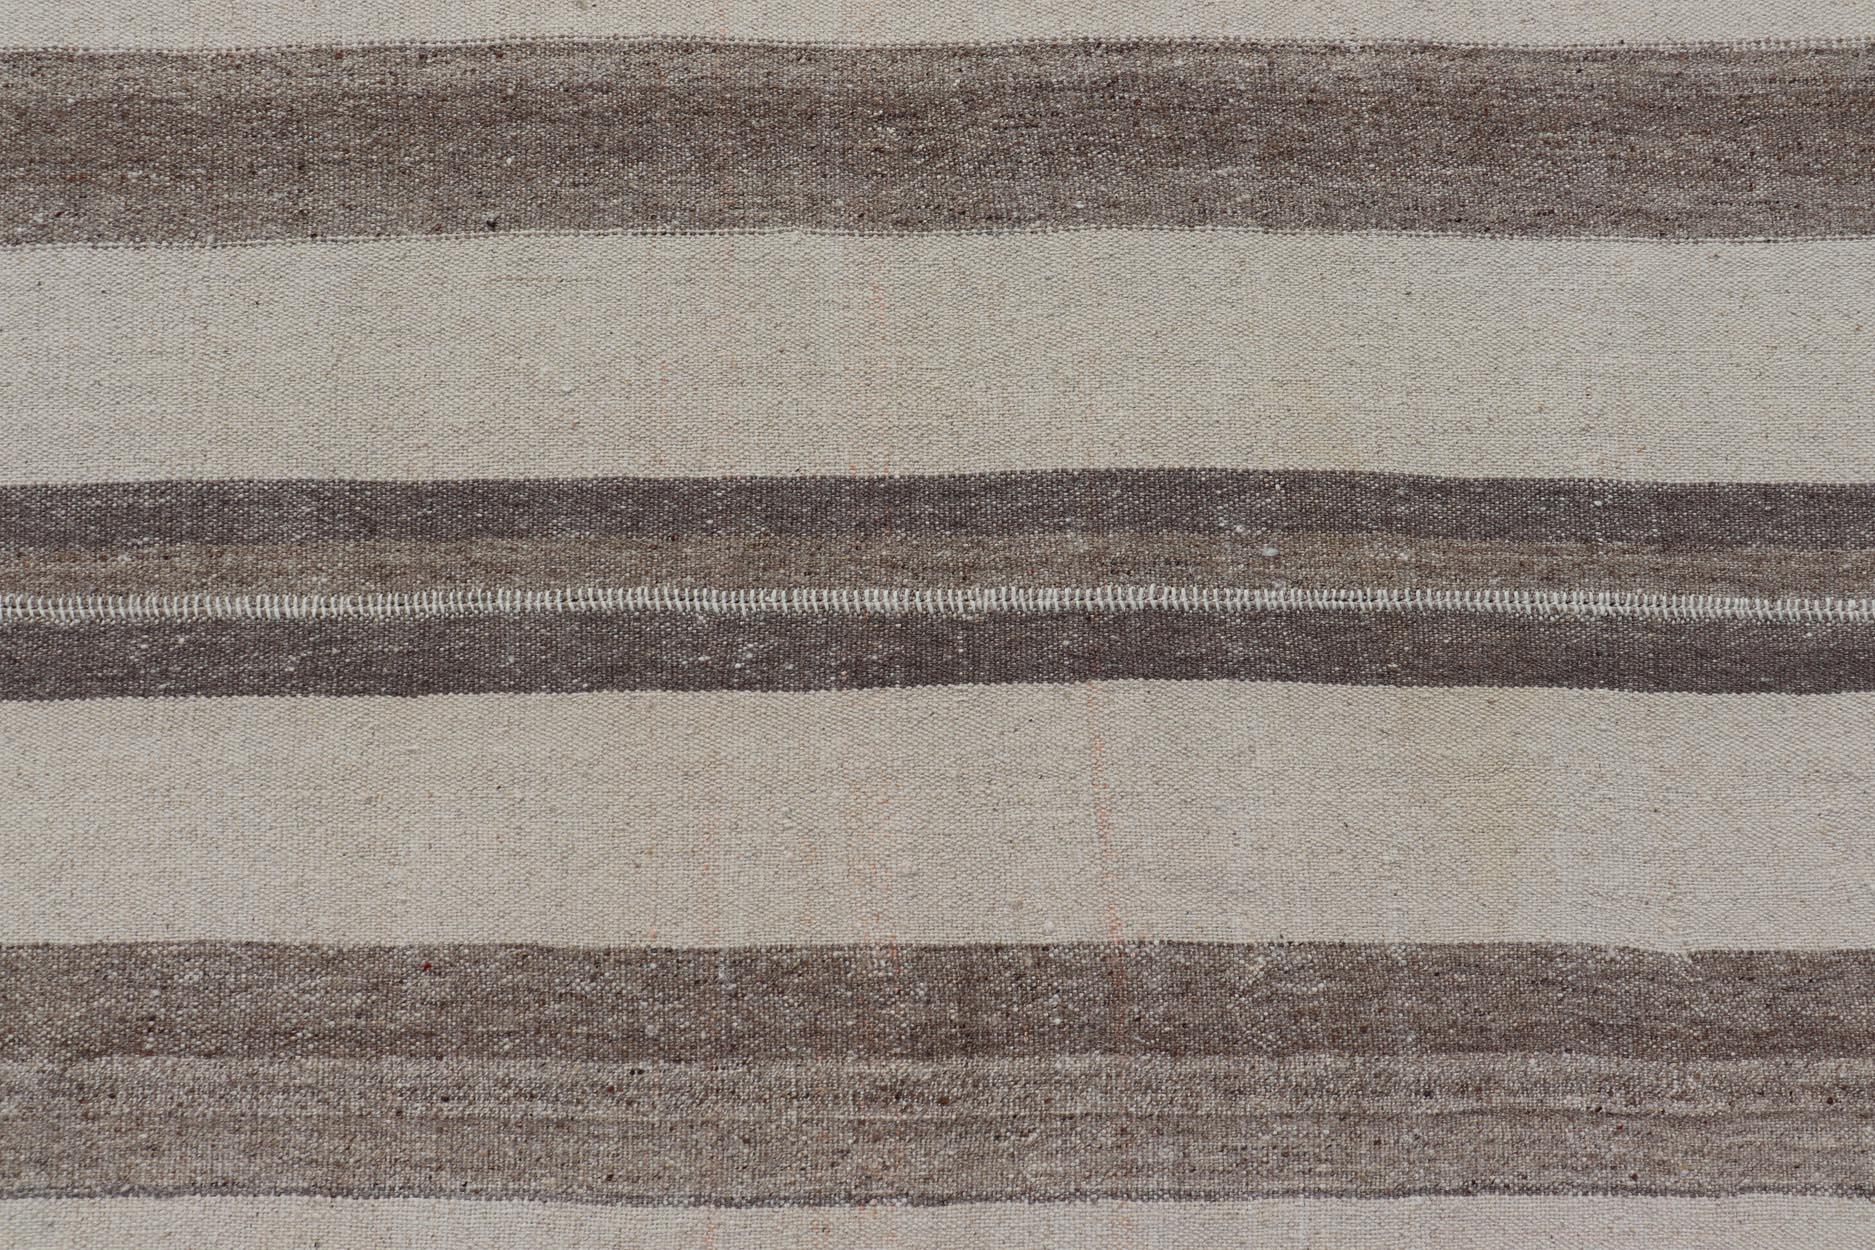 Large Vintage Turkish Kilim Rug with Stripes in Brown, White and Cream For Sale 11